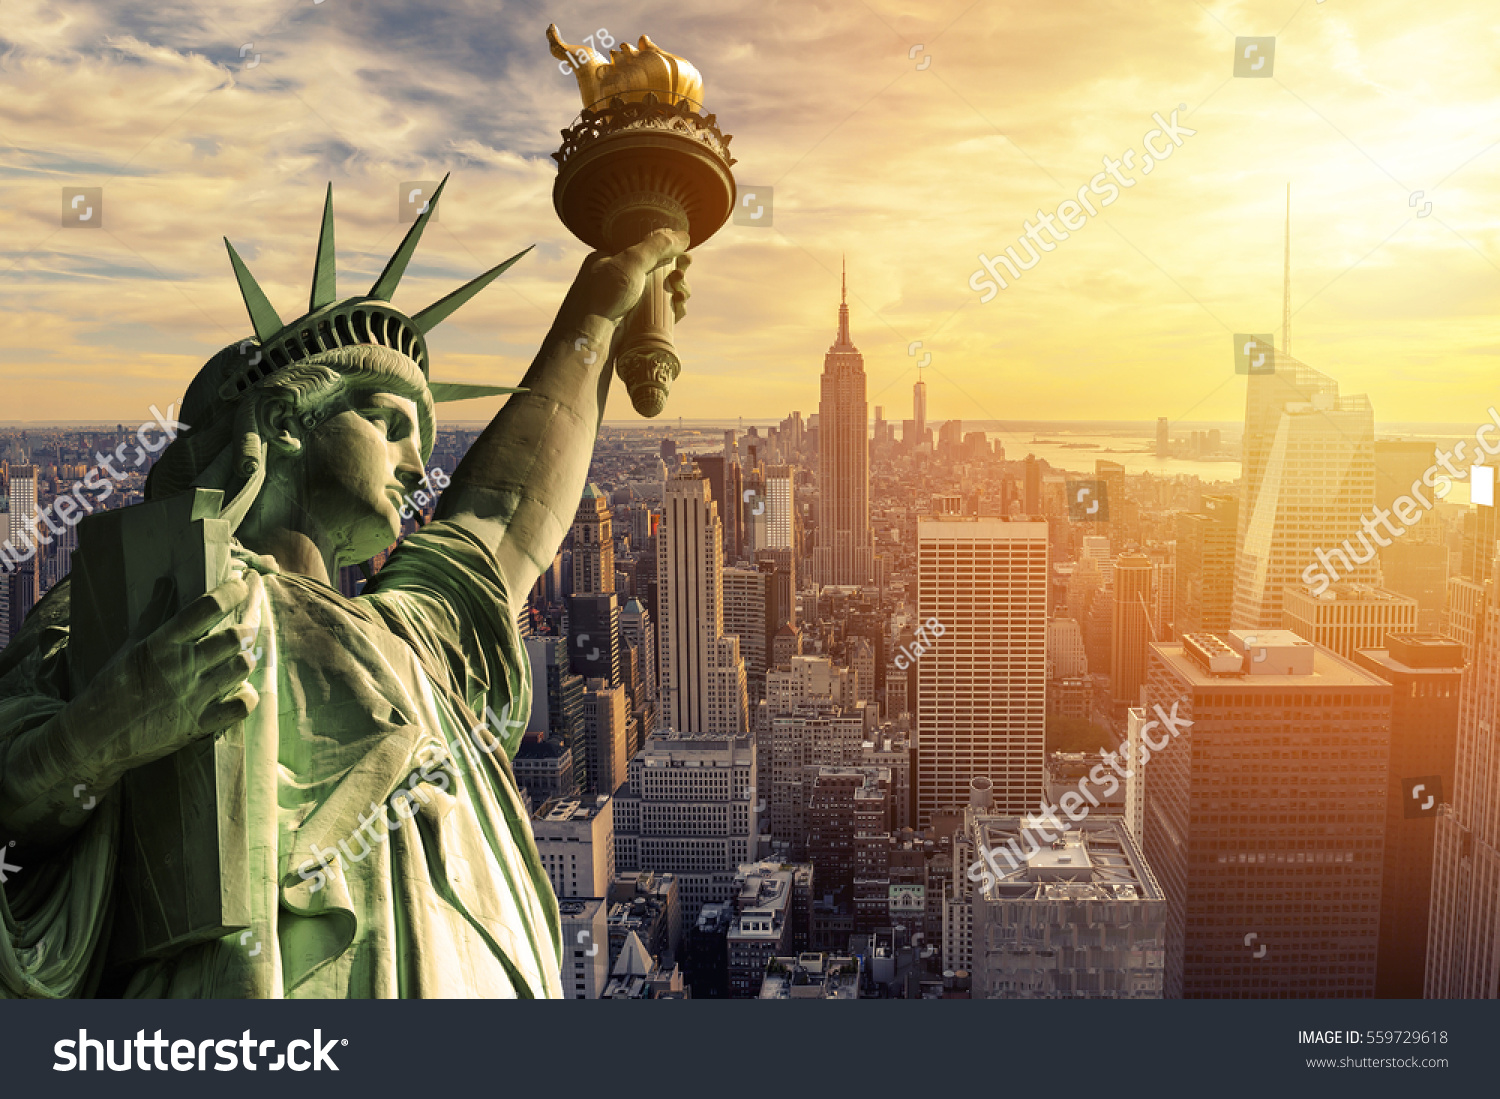 The Statue of Liberty and New York City skyline at dark #559729618